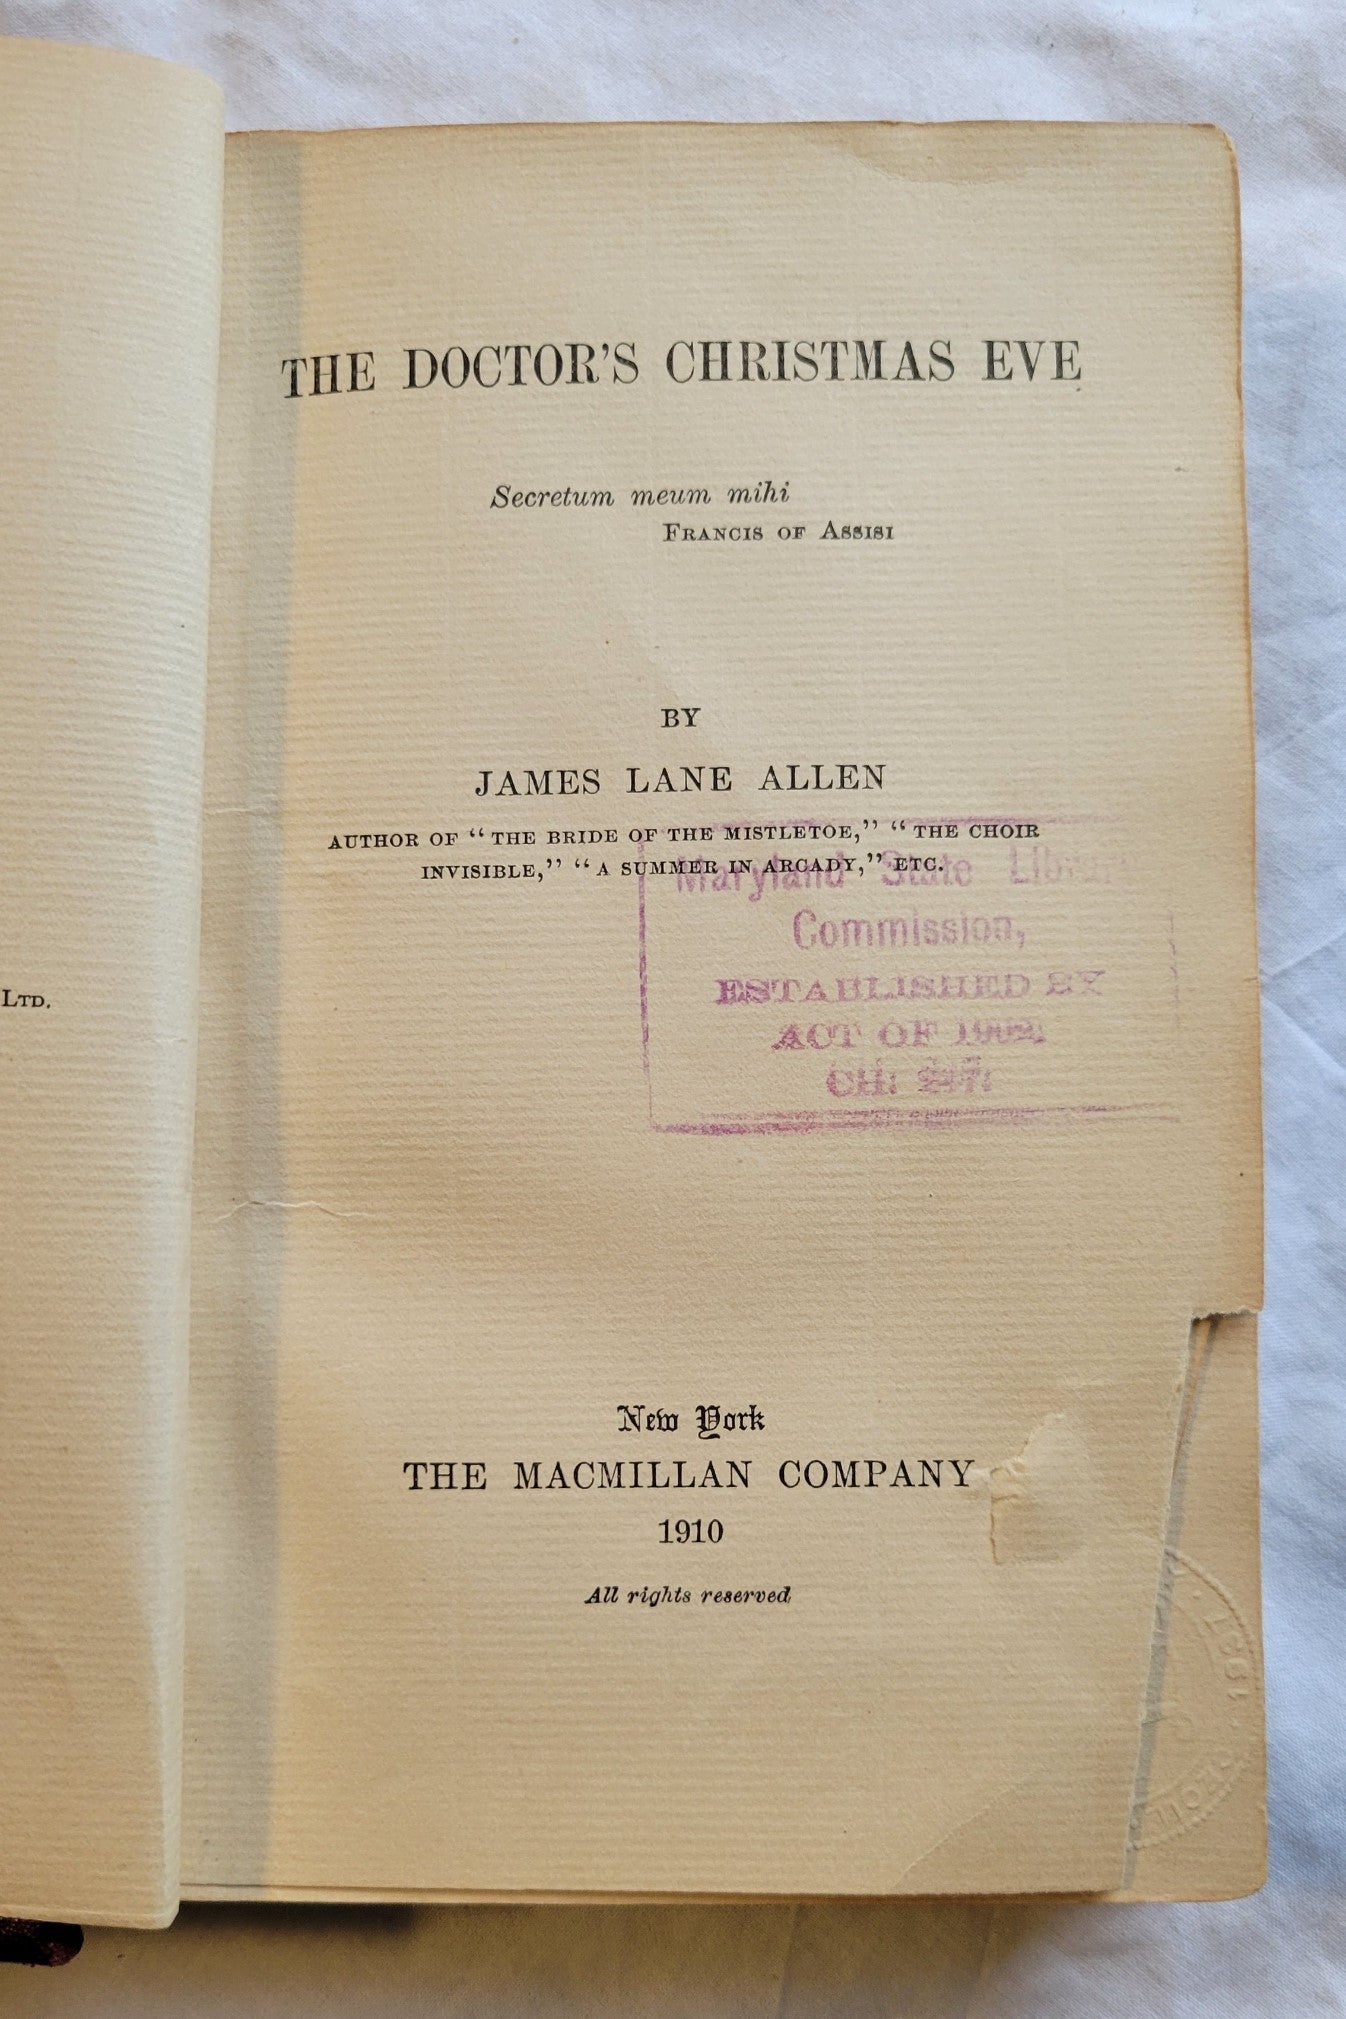  Antique book for sale "The Doctor's Christmas Eve" by James Lane Allen, published by The Macmillan Company, 1910. Title page.